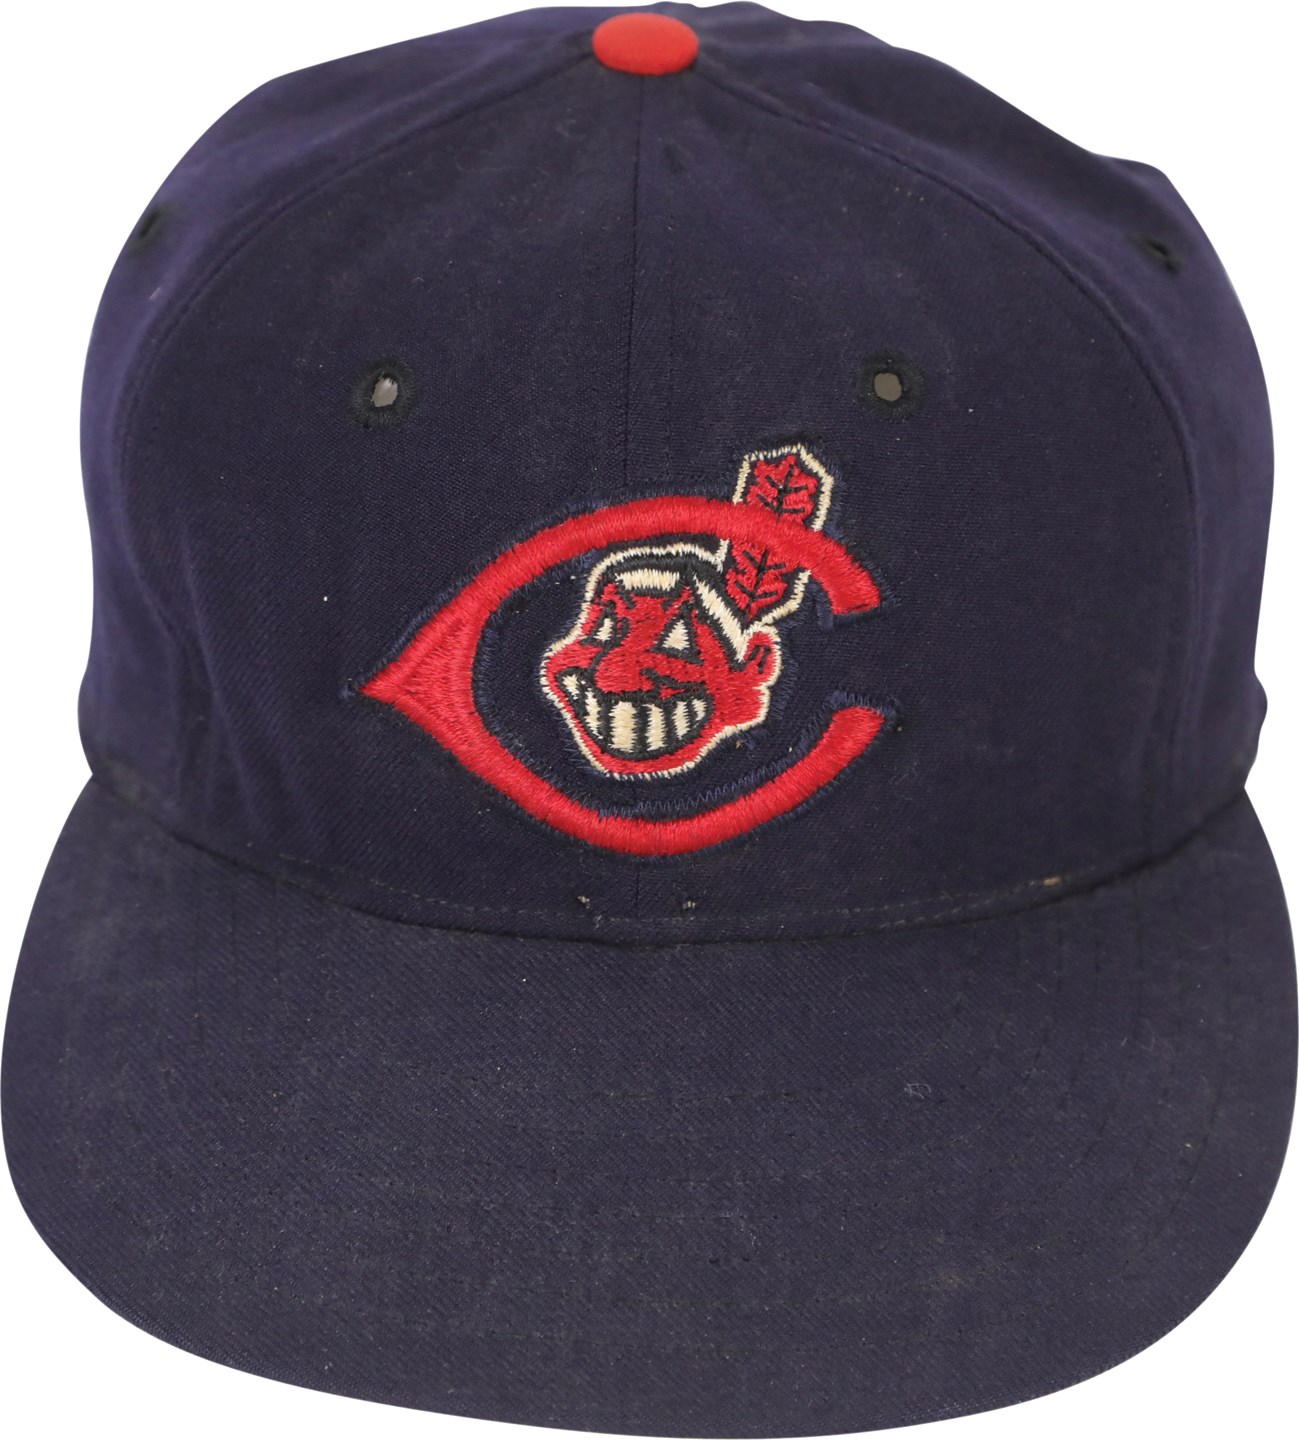 Baseball Equipment - 1950s Cleveland Indians Game Used Cap